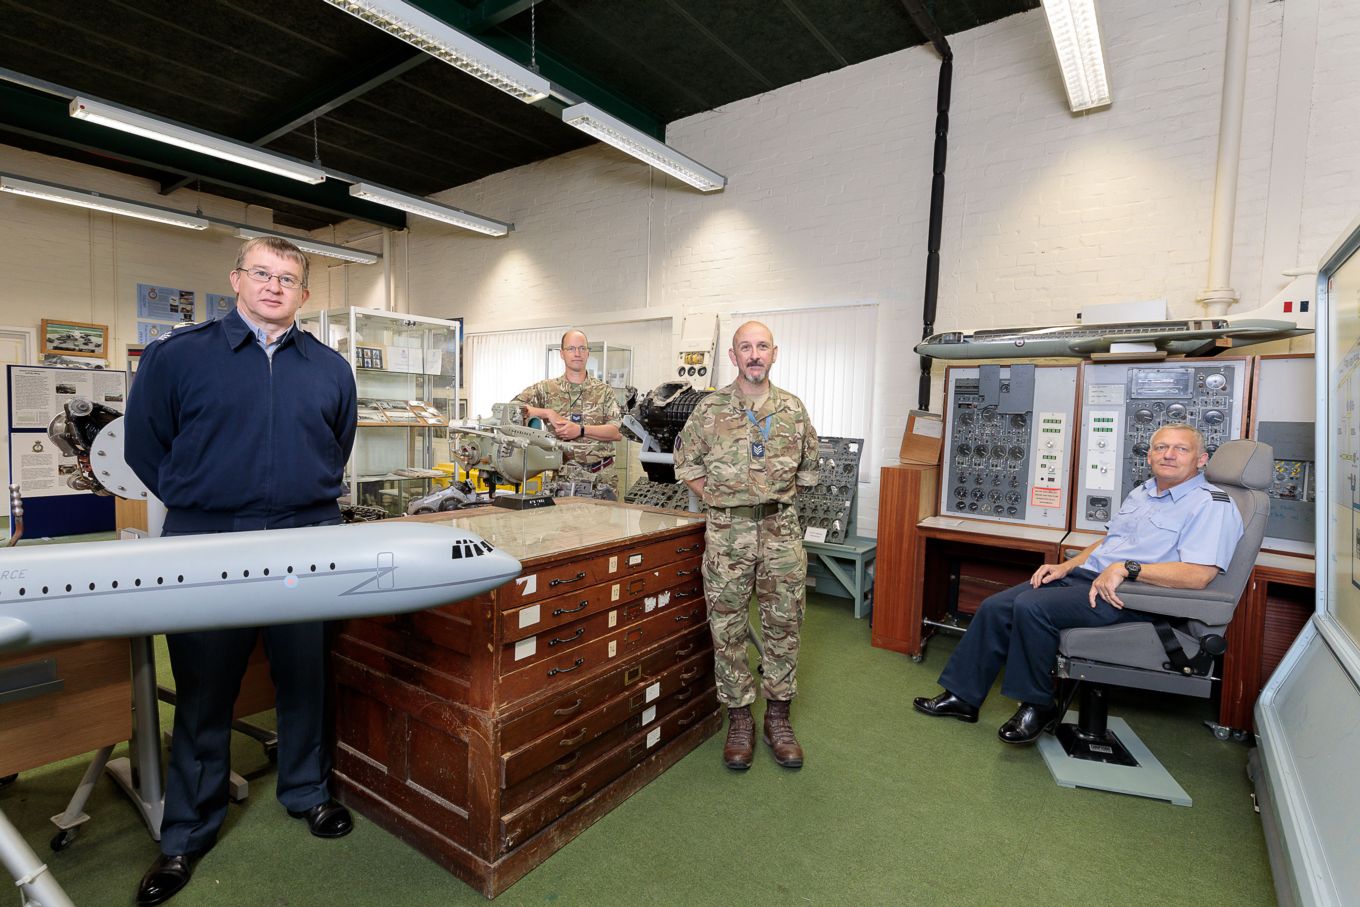 Squadron Leader Andy Marshall with RAF Brize Norton Heritage Centre volunteers